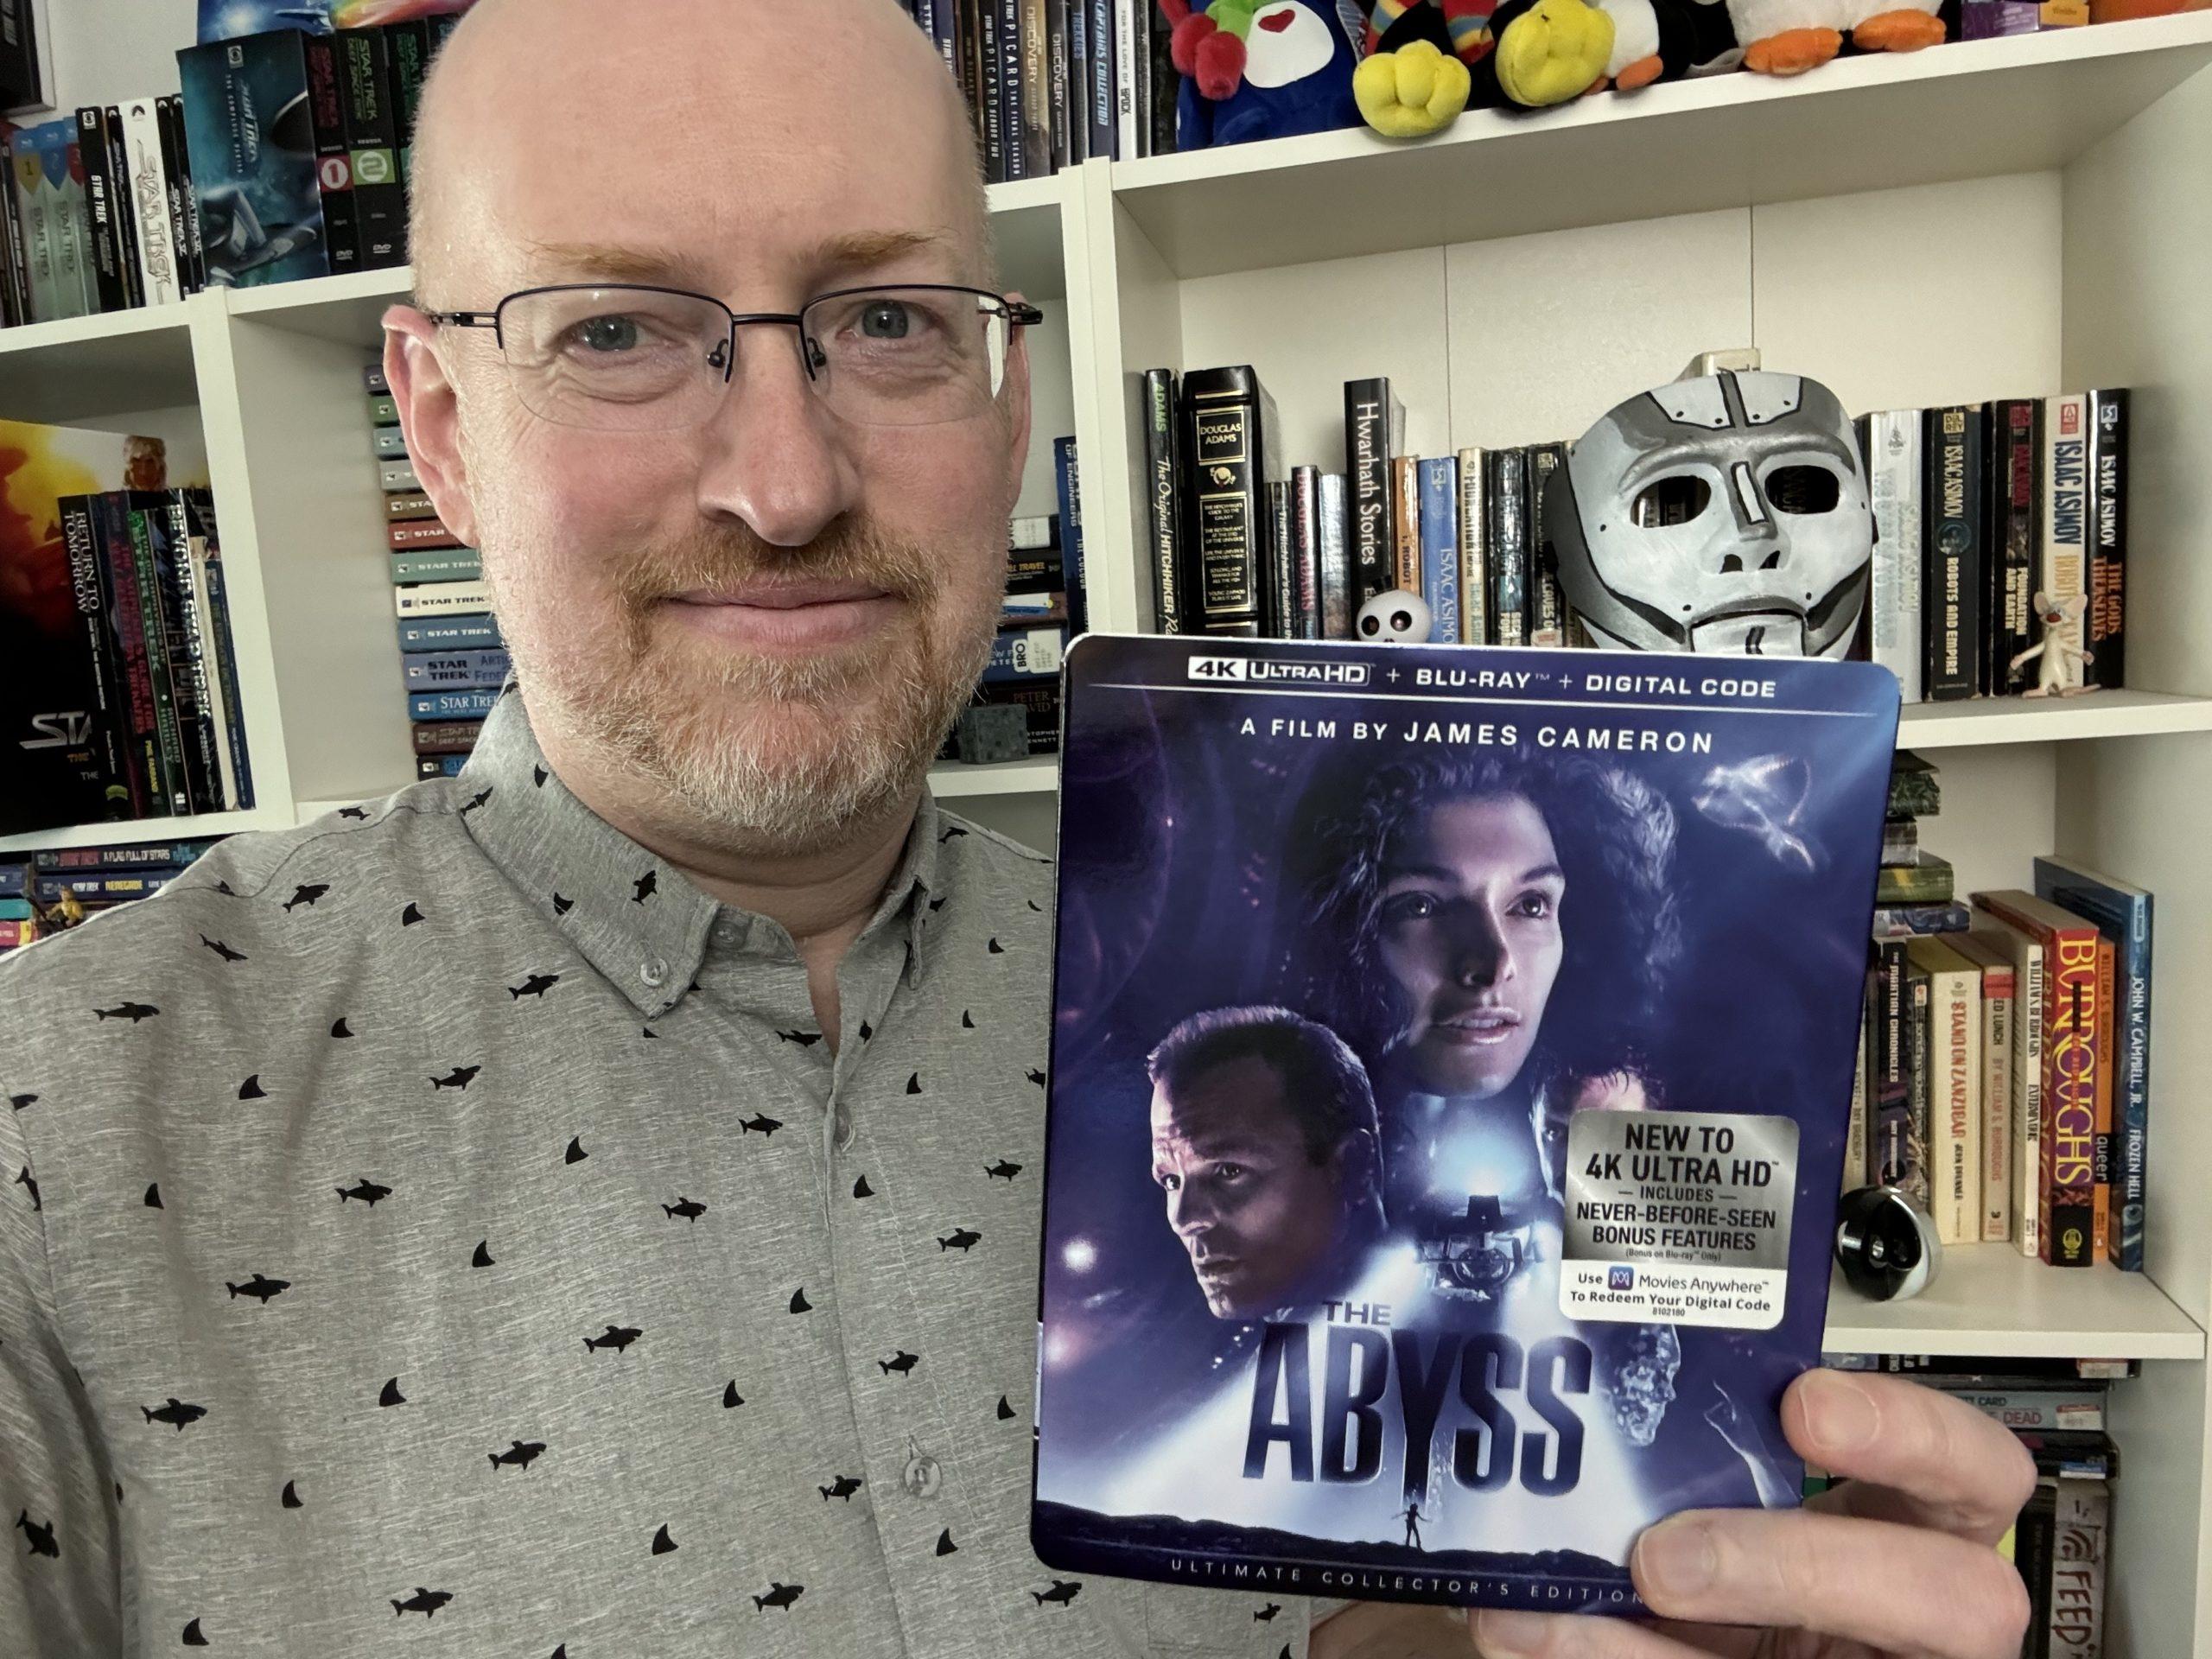 Me holding the 4K release of The Abyss.